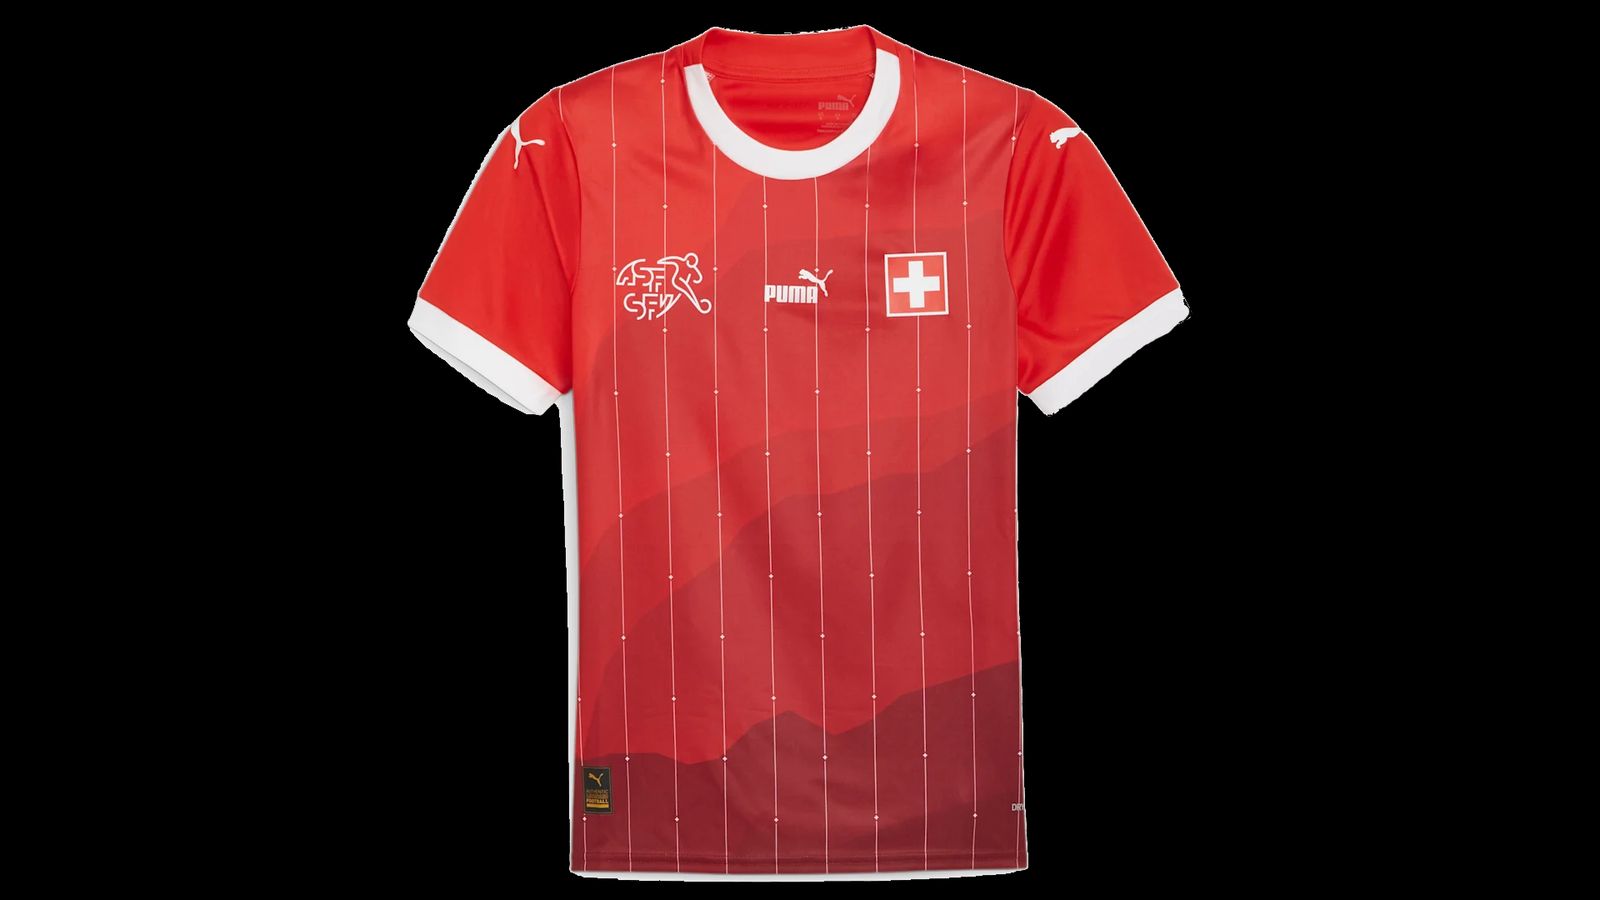 Switzerland PUMA Women's Home kit product image of a red jersey featuring white pin stripes and branding along with darker mountain-like graphics in the background.